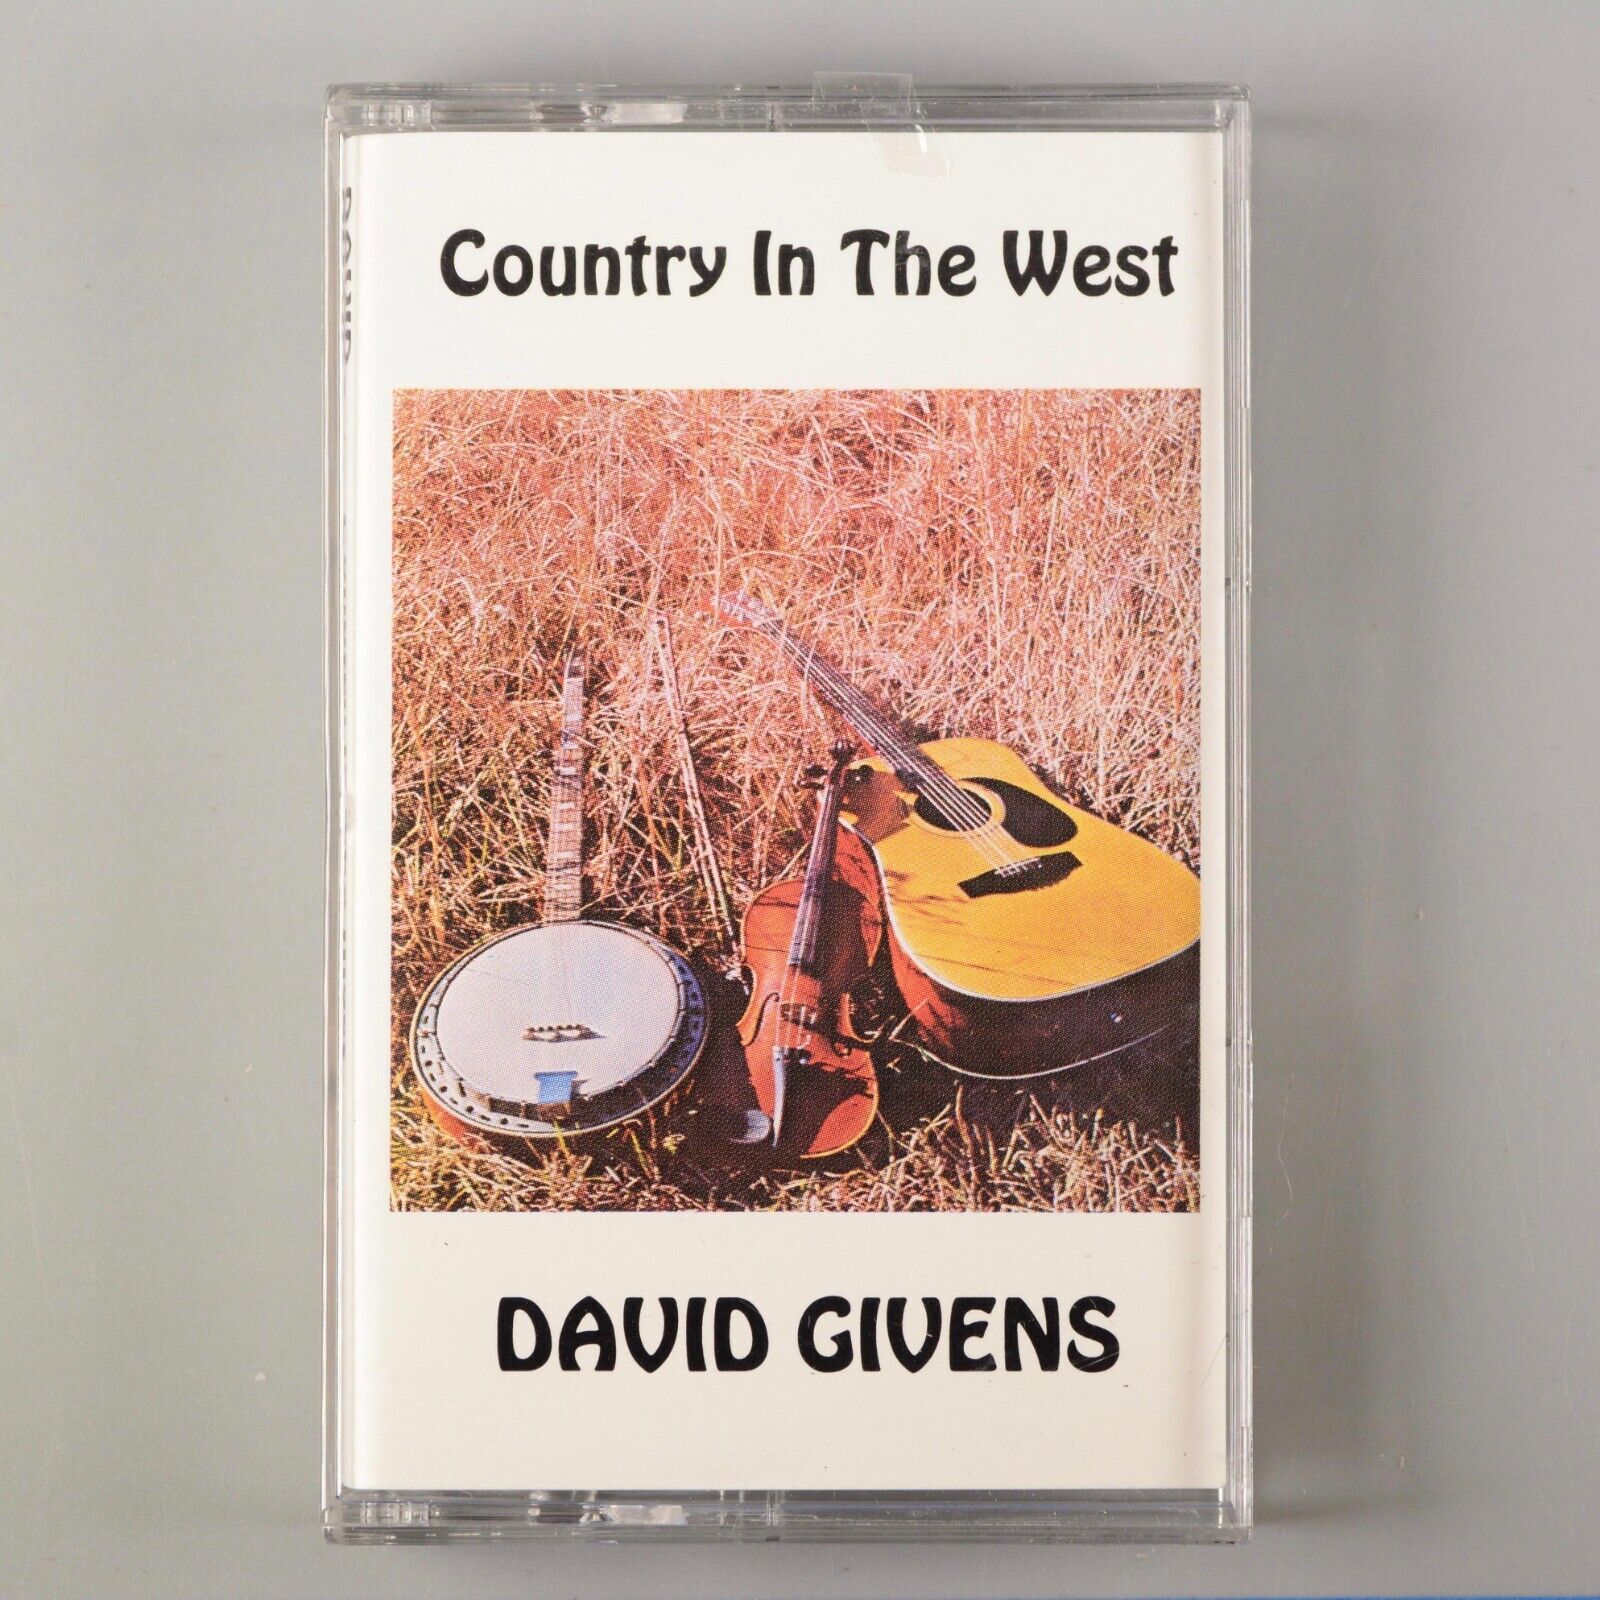 David Givens - Country in the West - private label cassette - Yuma Arizona